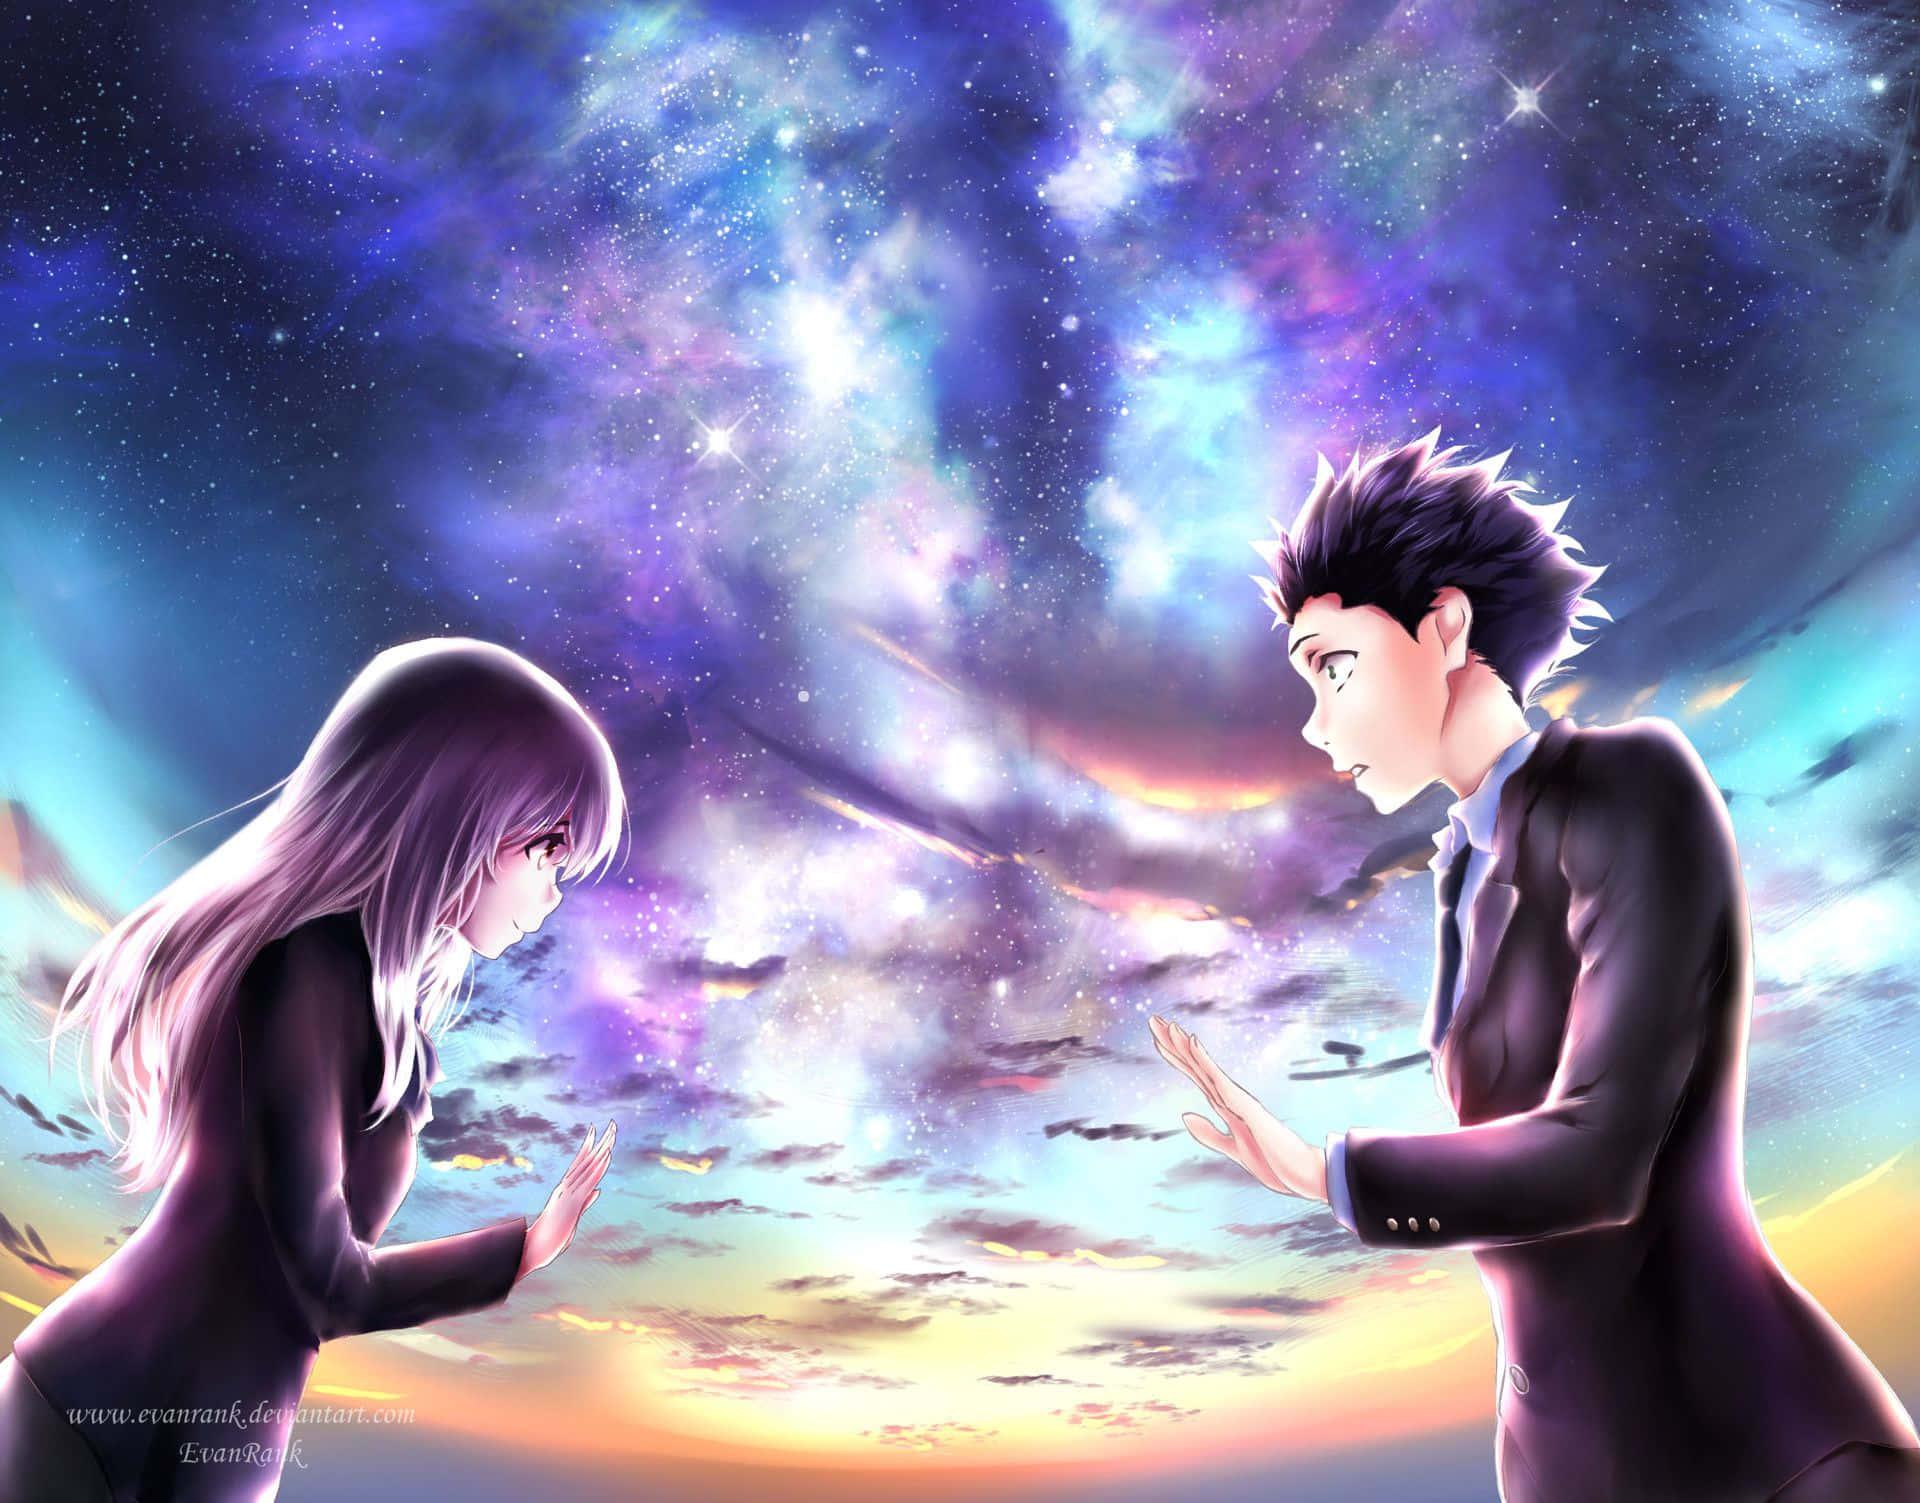 A Silent Voice - Finding Our Voice